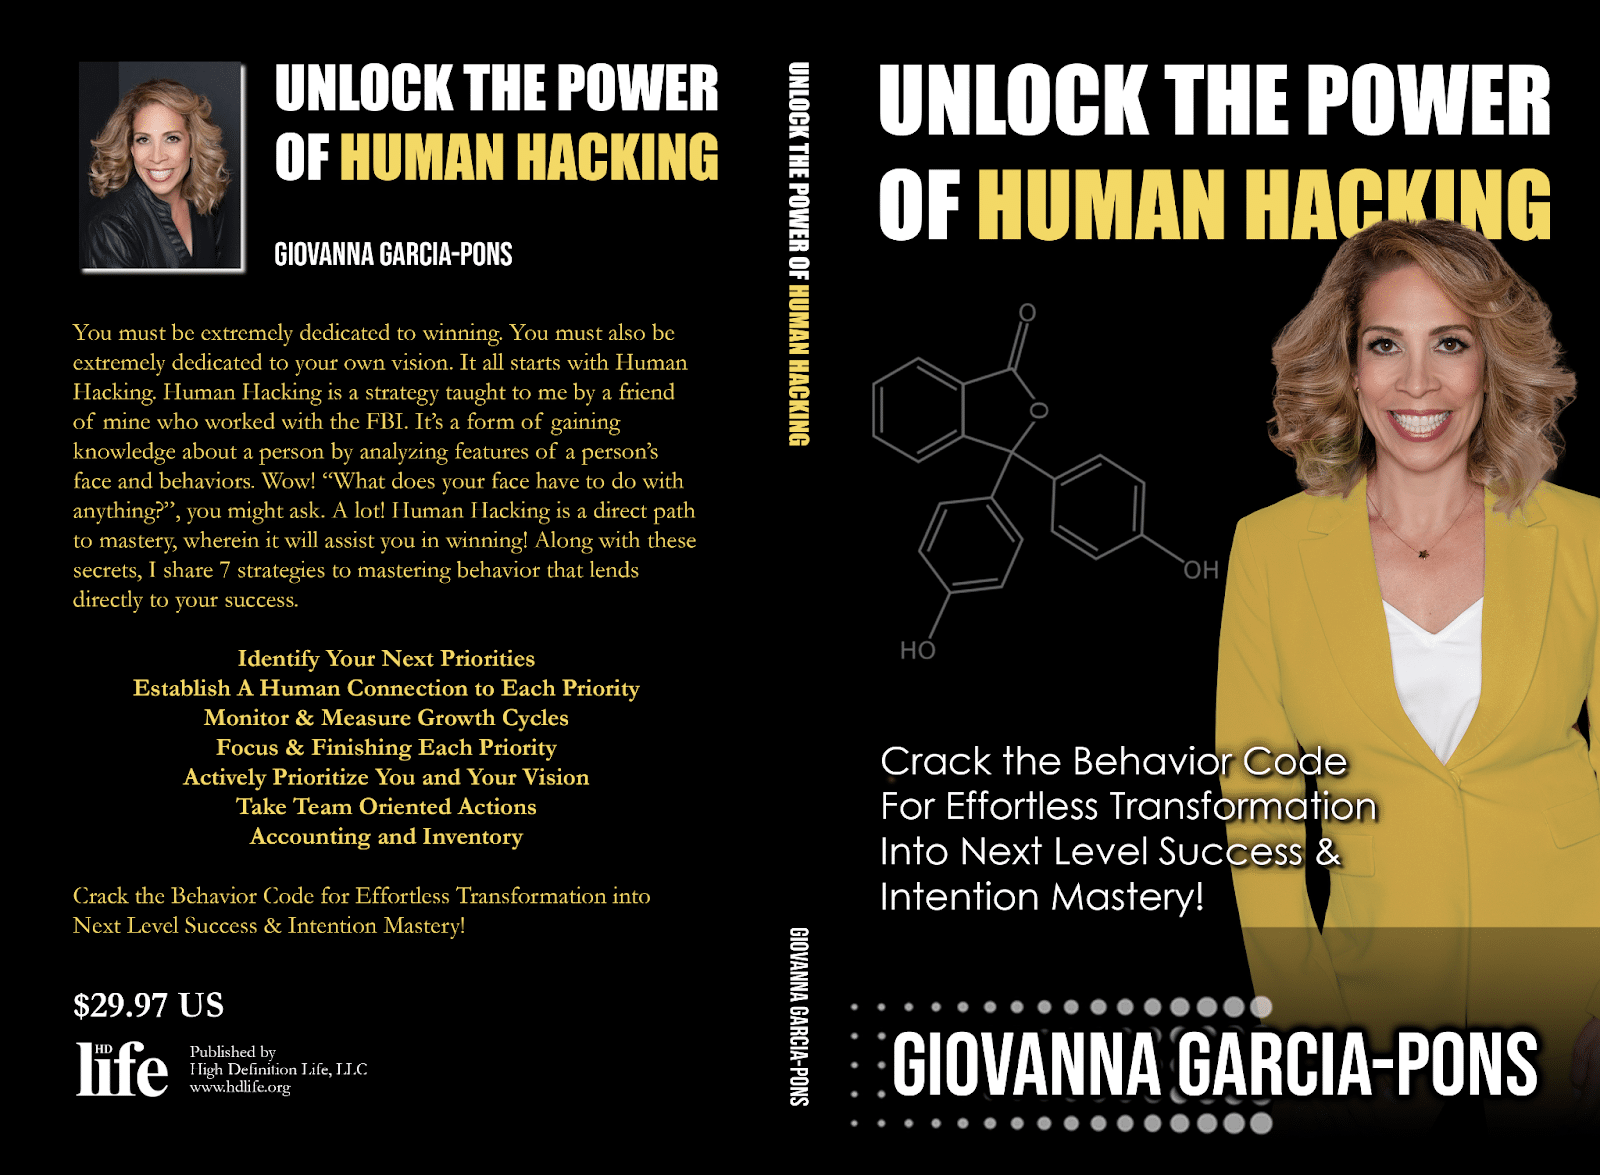 Redefining Power in the Digital Age- Giovanna Garcia-Pons' Message of Self-Discovery and Empowerment